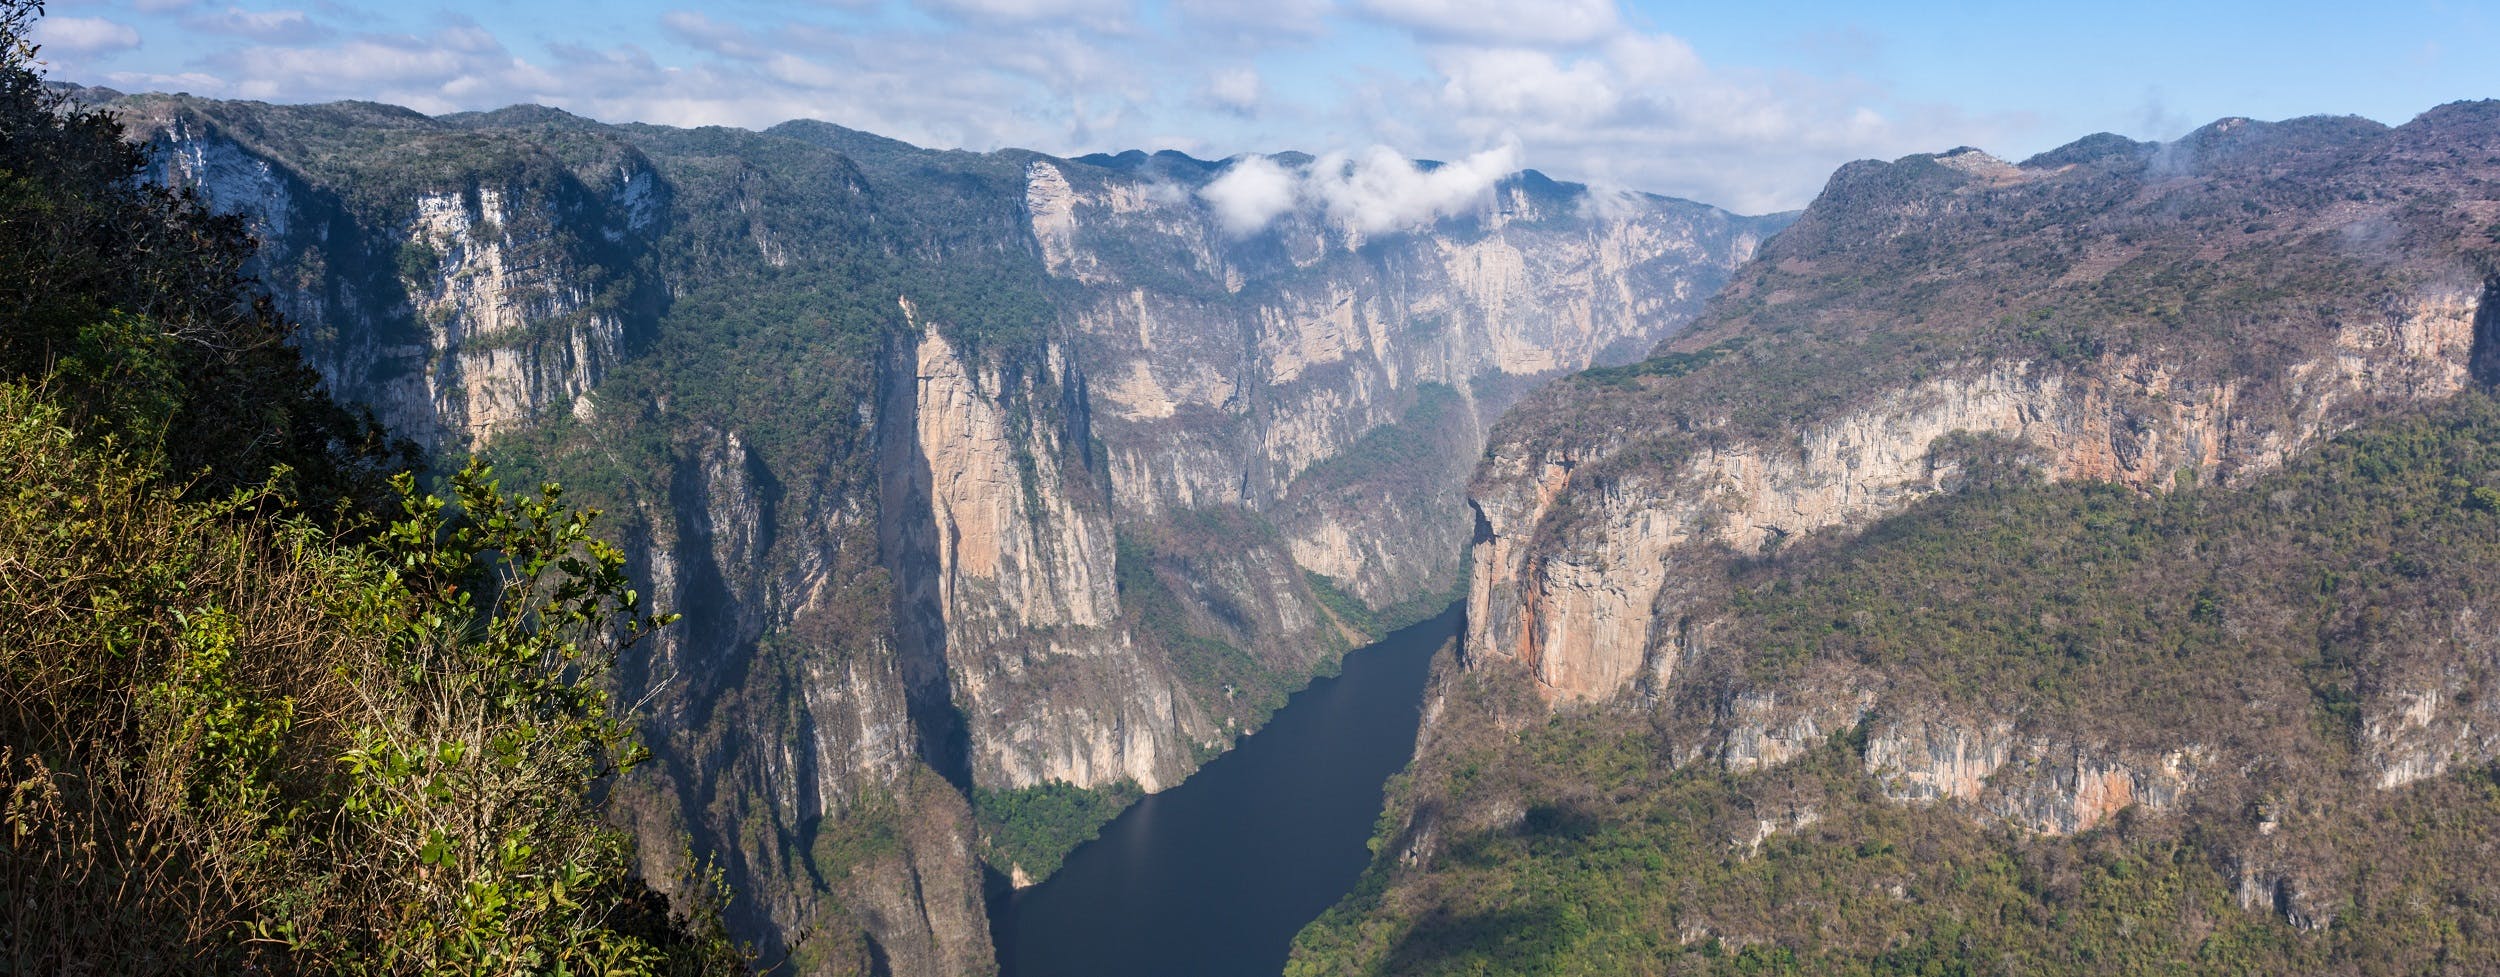 Sumidero Canyon guided tour from Tuxtla Gutiérrez Airport or hotel Musement